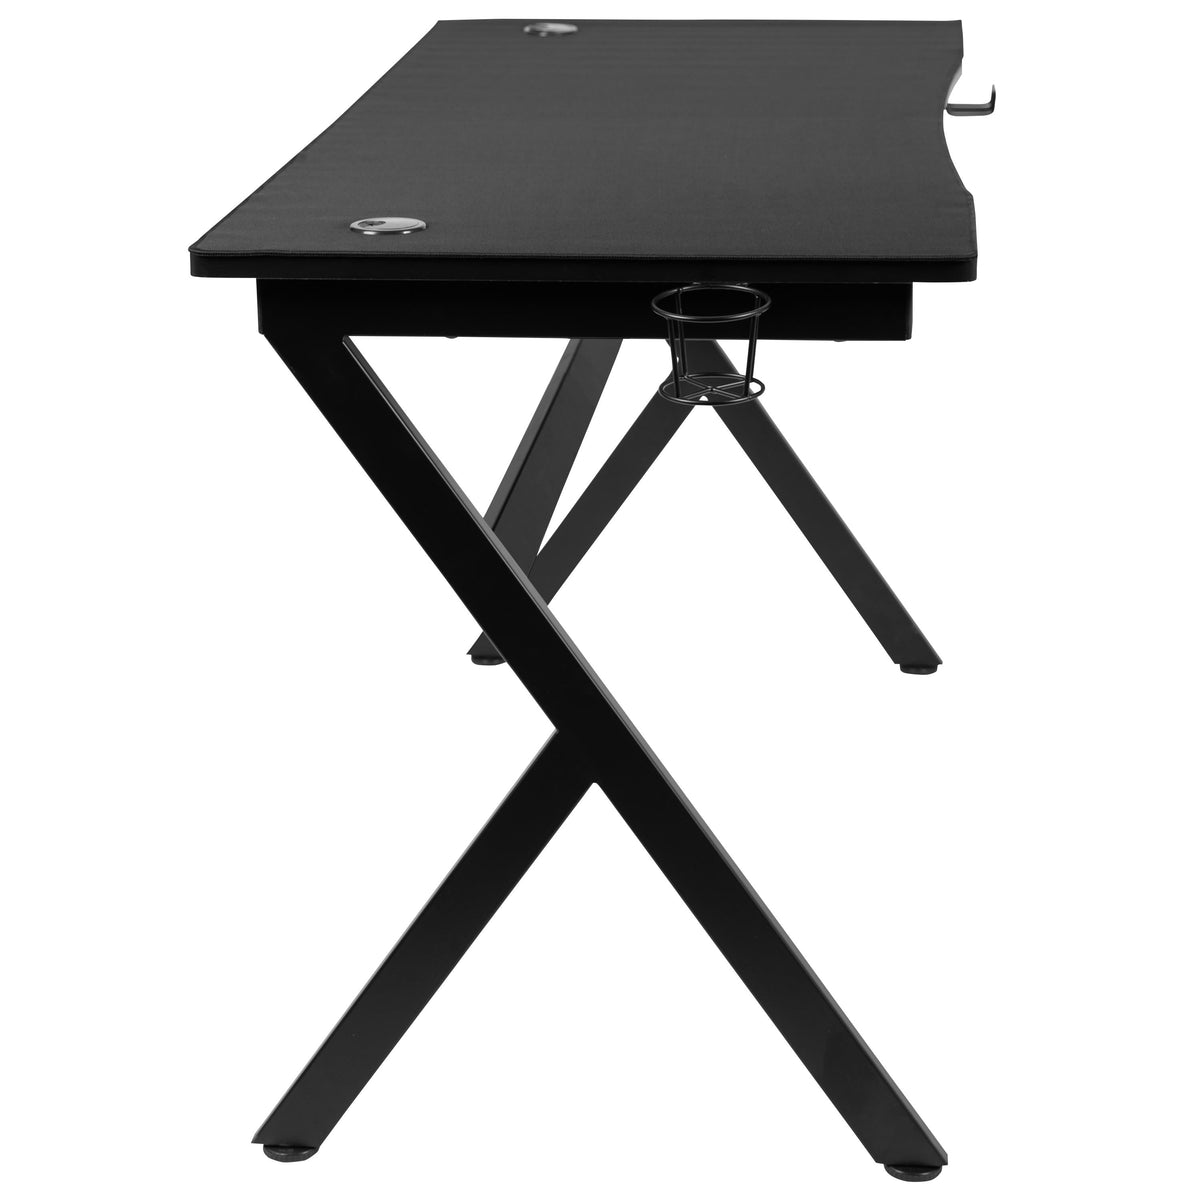 55inch Black Computer Gaming Desk - Headphone Holder - Cable Management - Mouse Pad